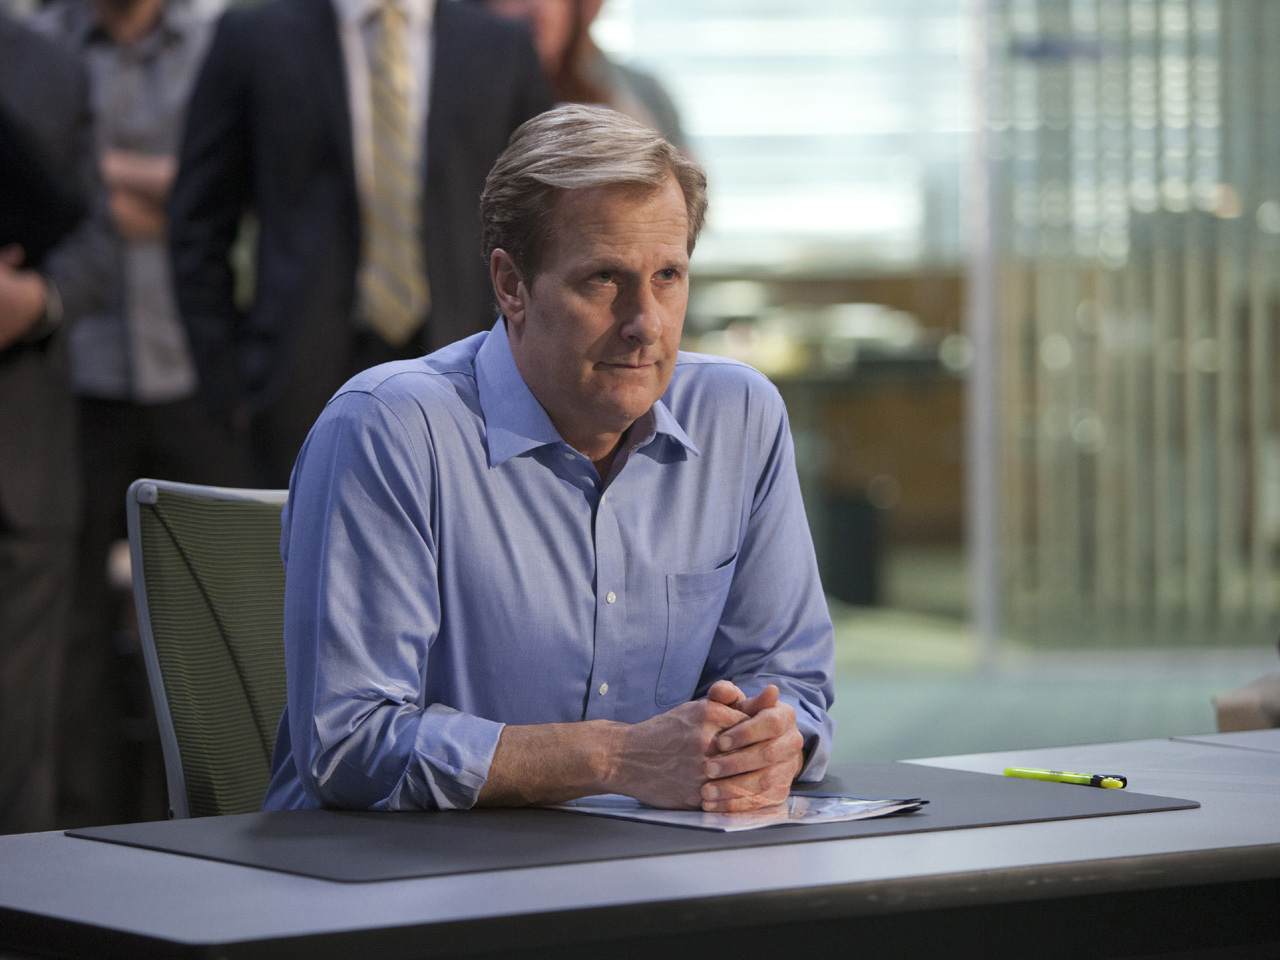 Aaron Sorkin Takes Viewers Inside The Newsroom One Last Time With 